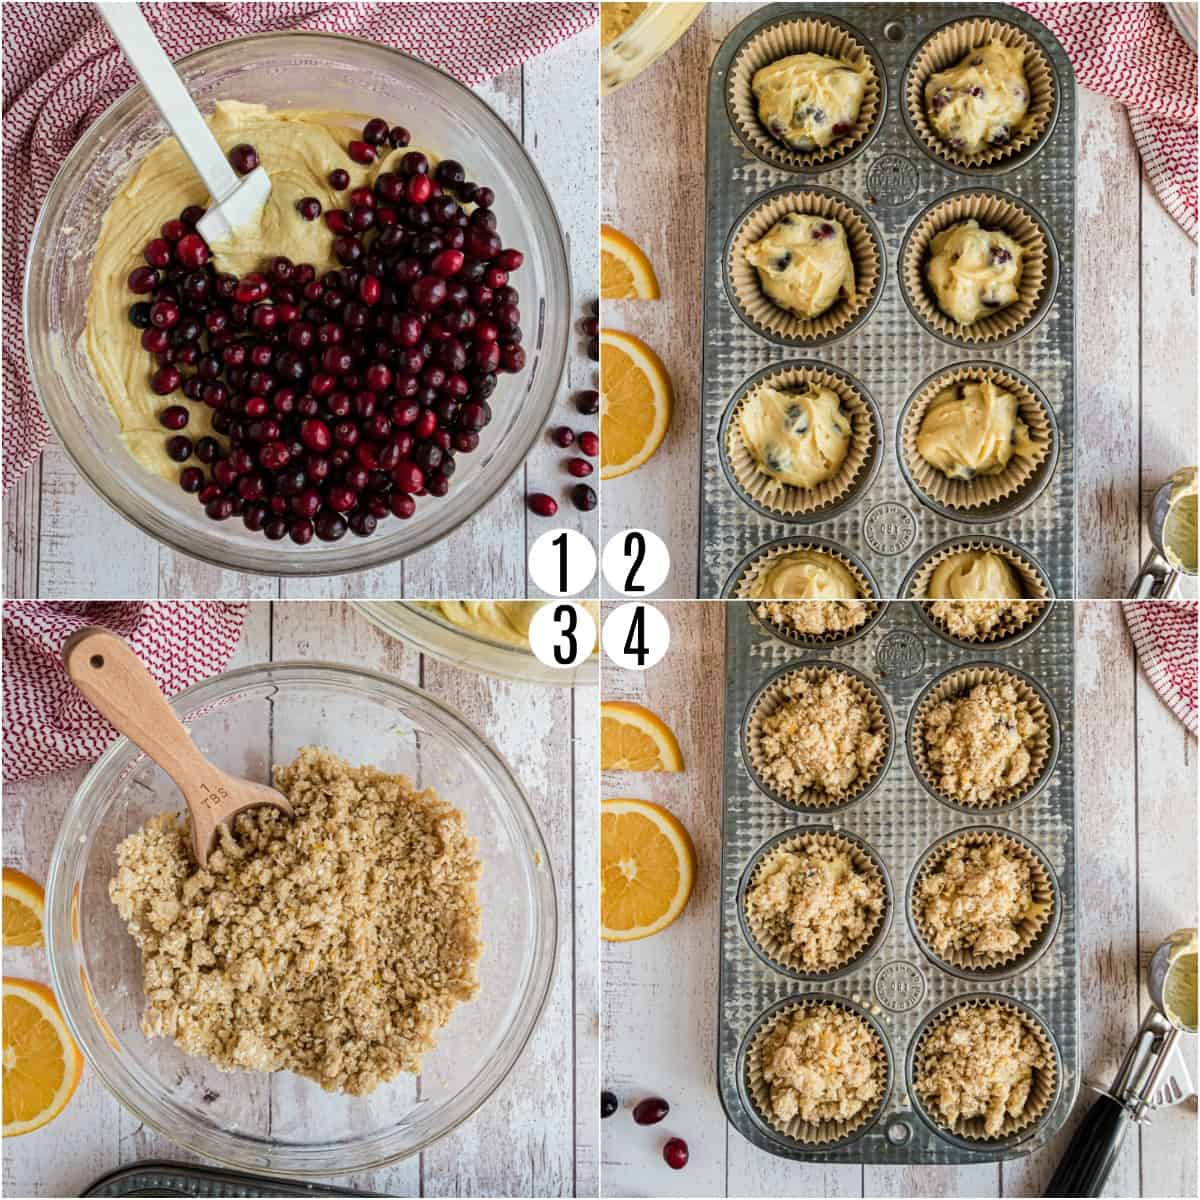 Step by step photos showing how to make cranberry orange muffins.